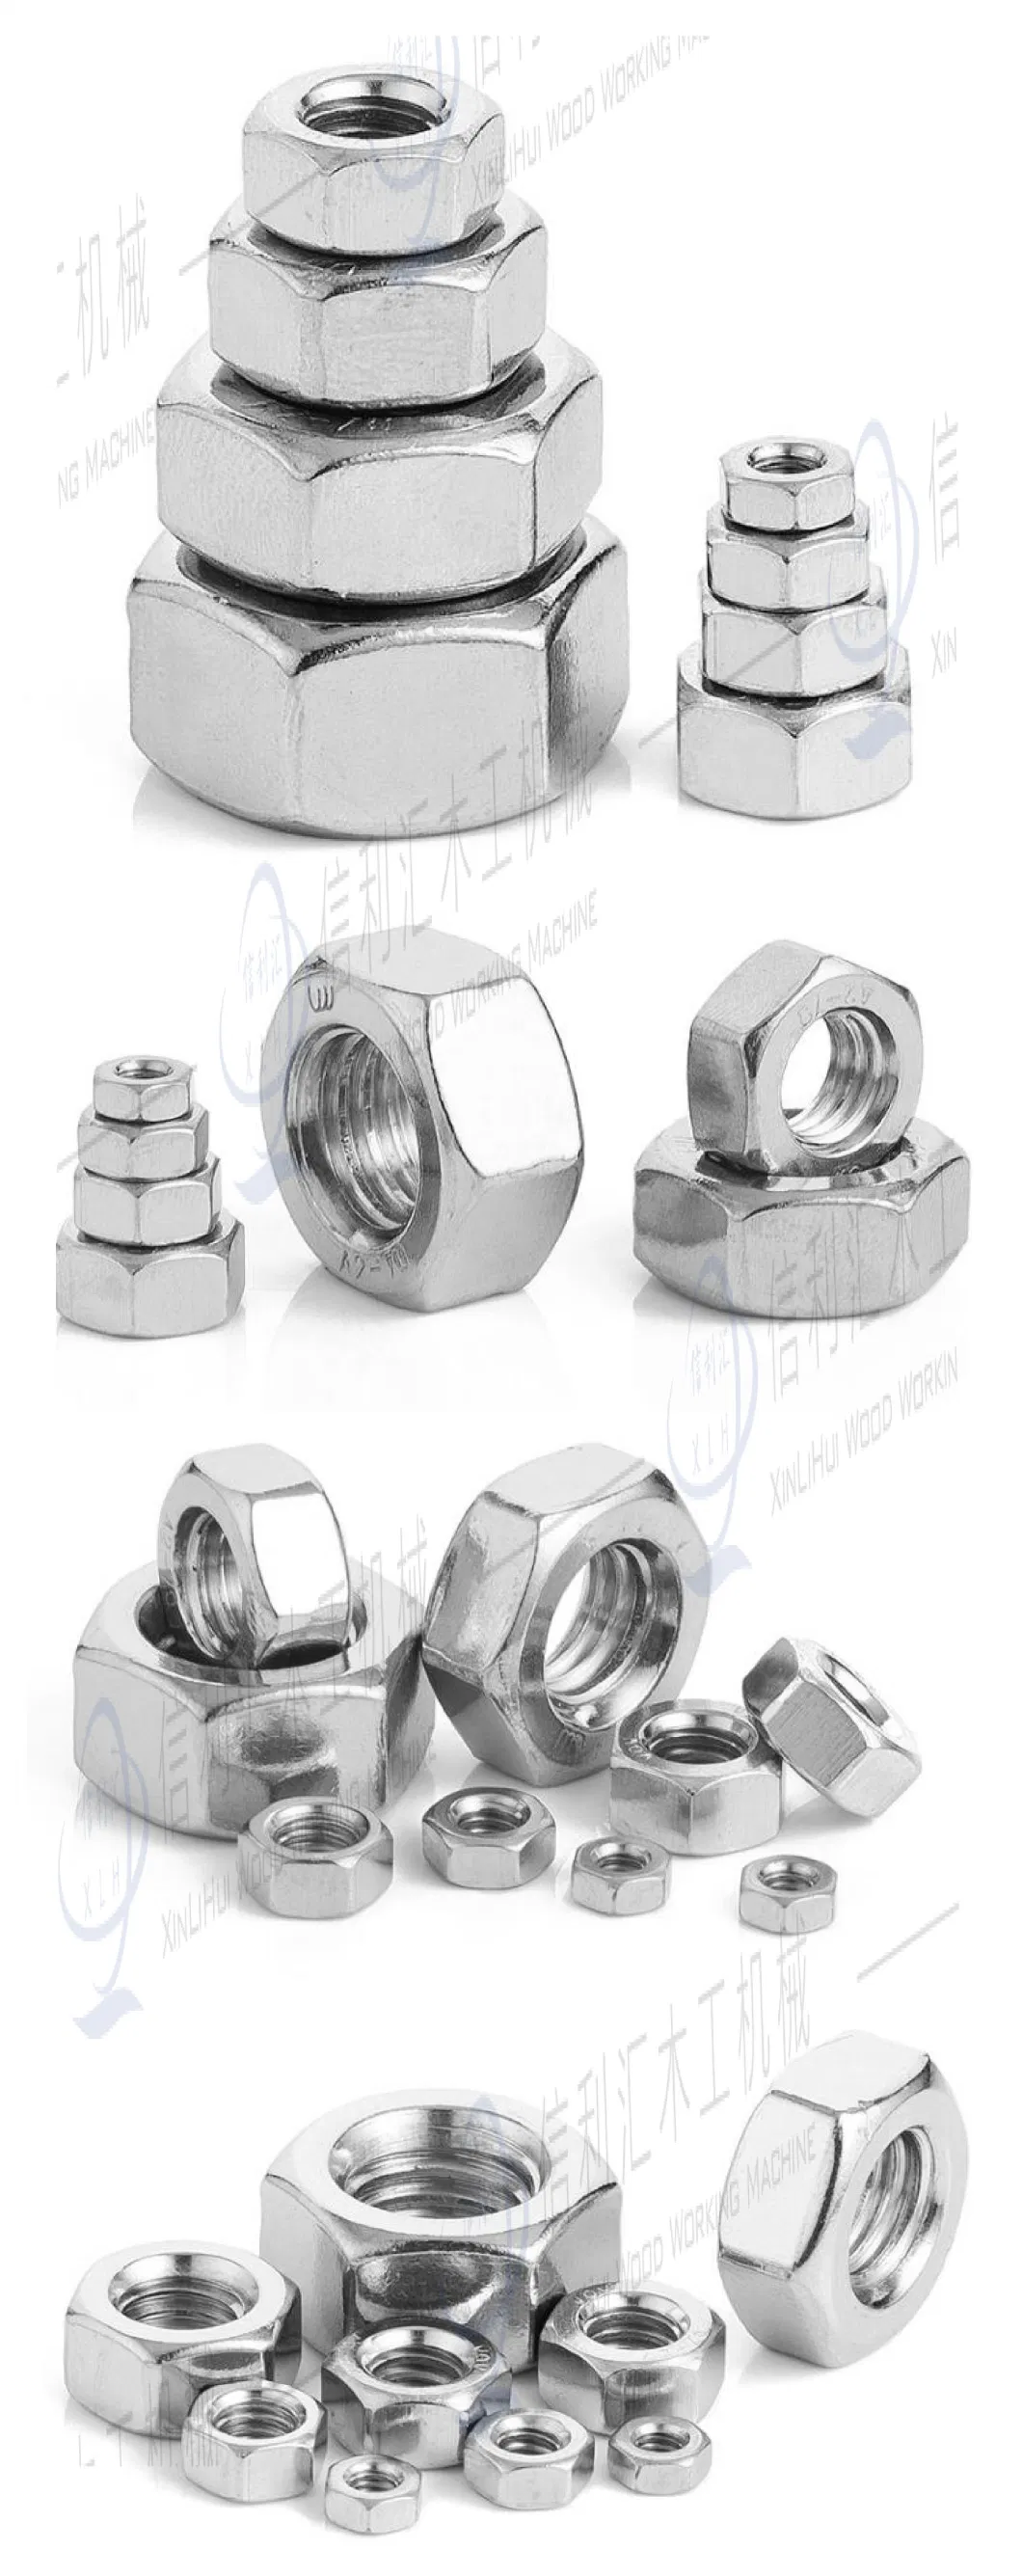 Standard Hex Nut and Specisl Shaped Non-Standard Nut, Hexagon Bolt Carbon Steel Stainless Steel SS304 316 Hex Nuts